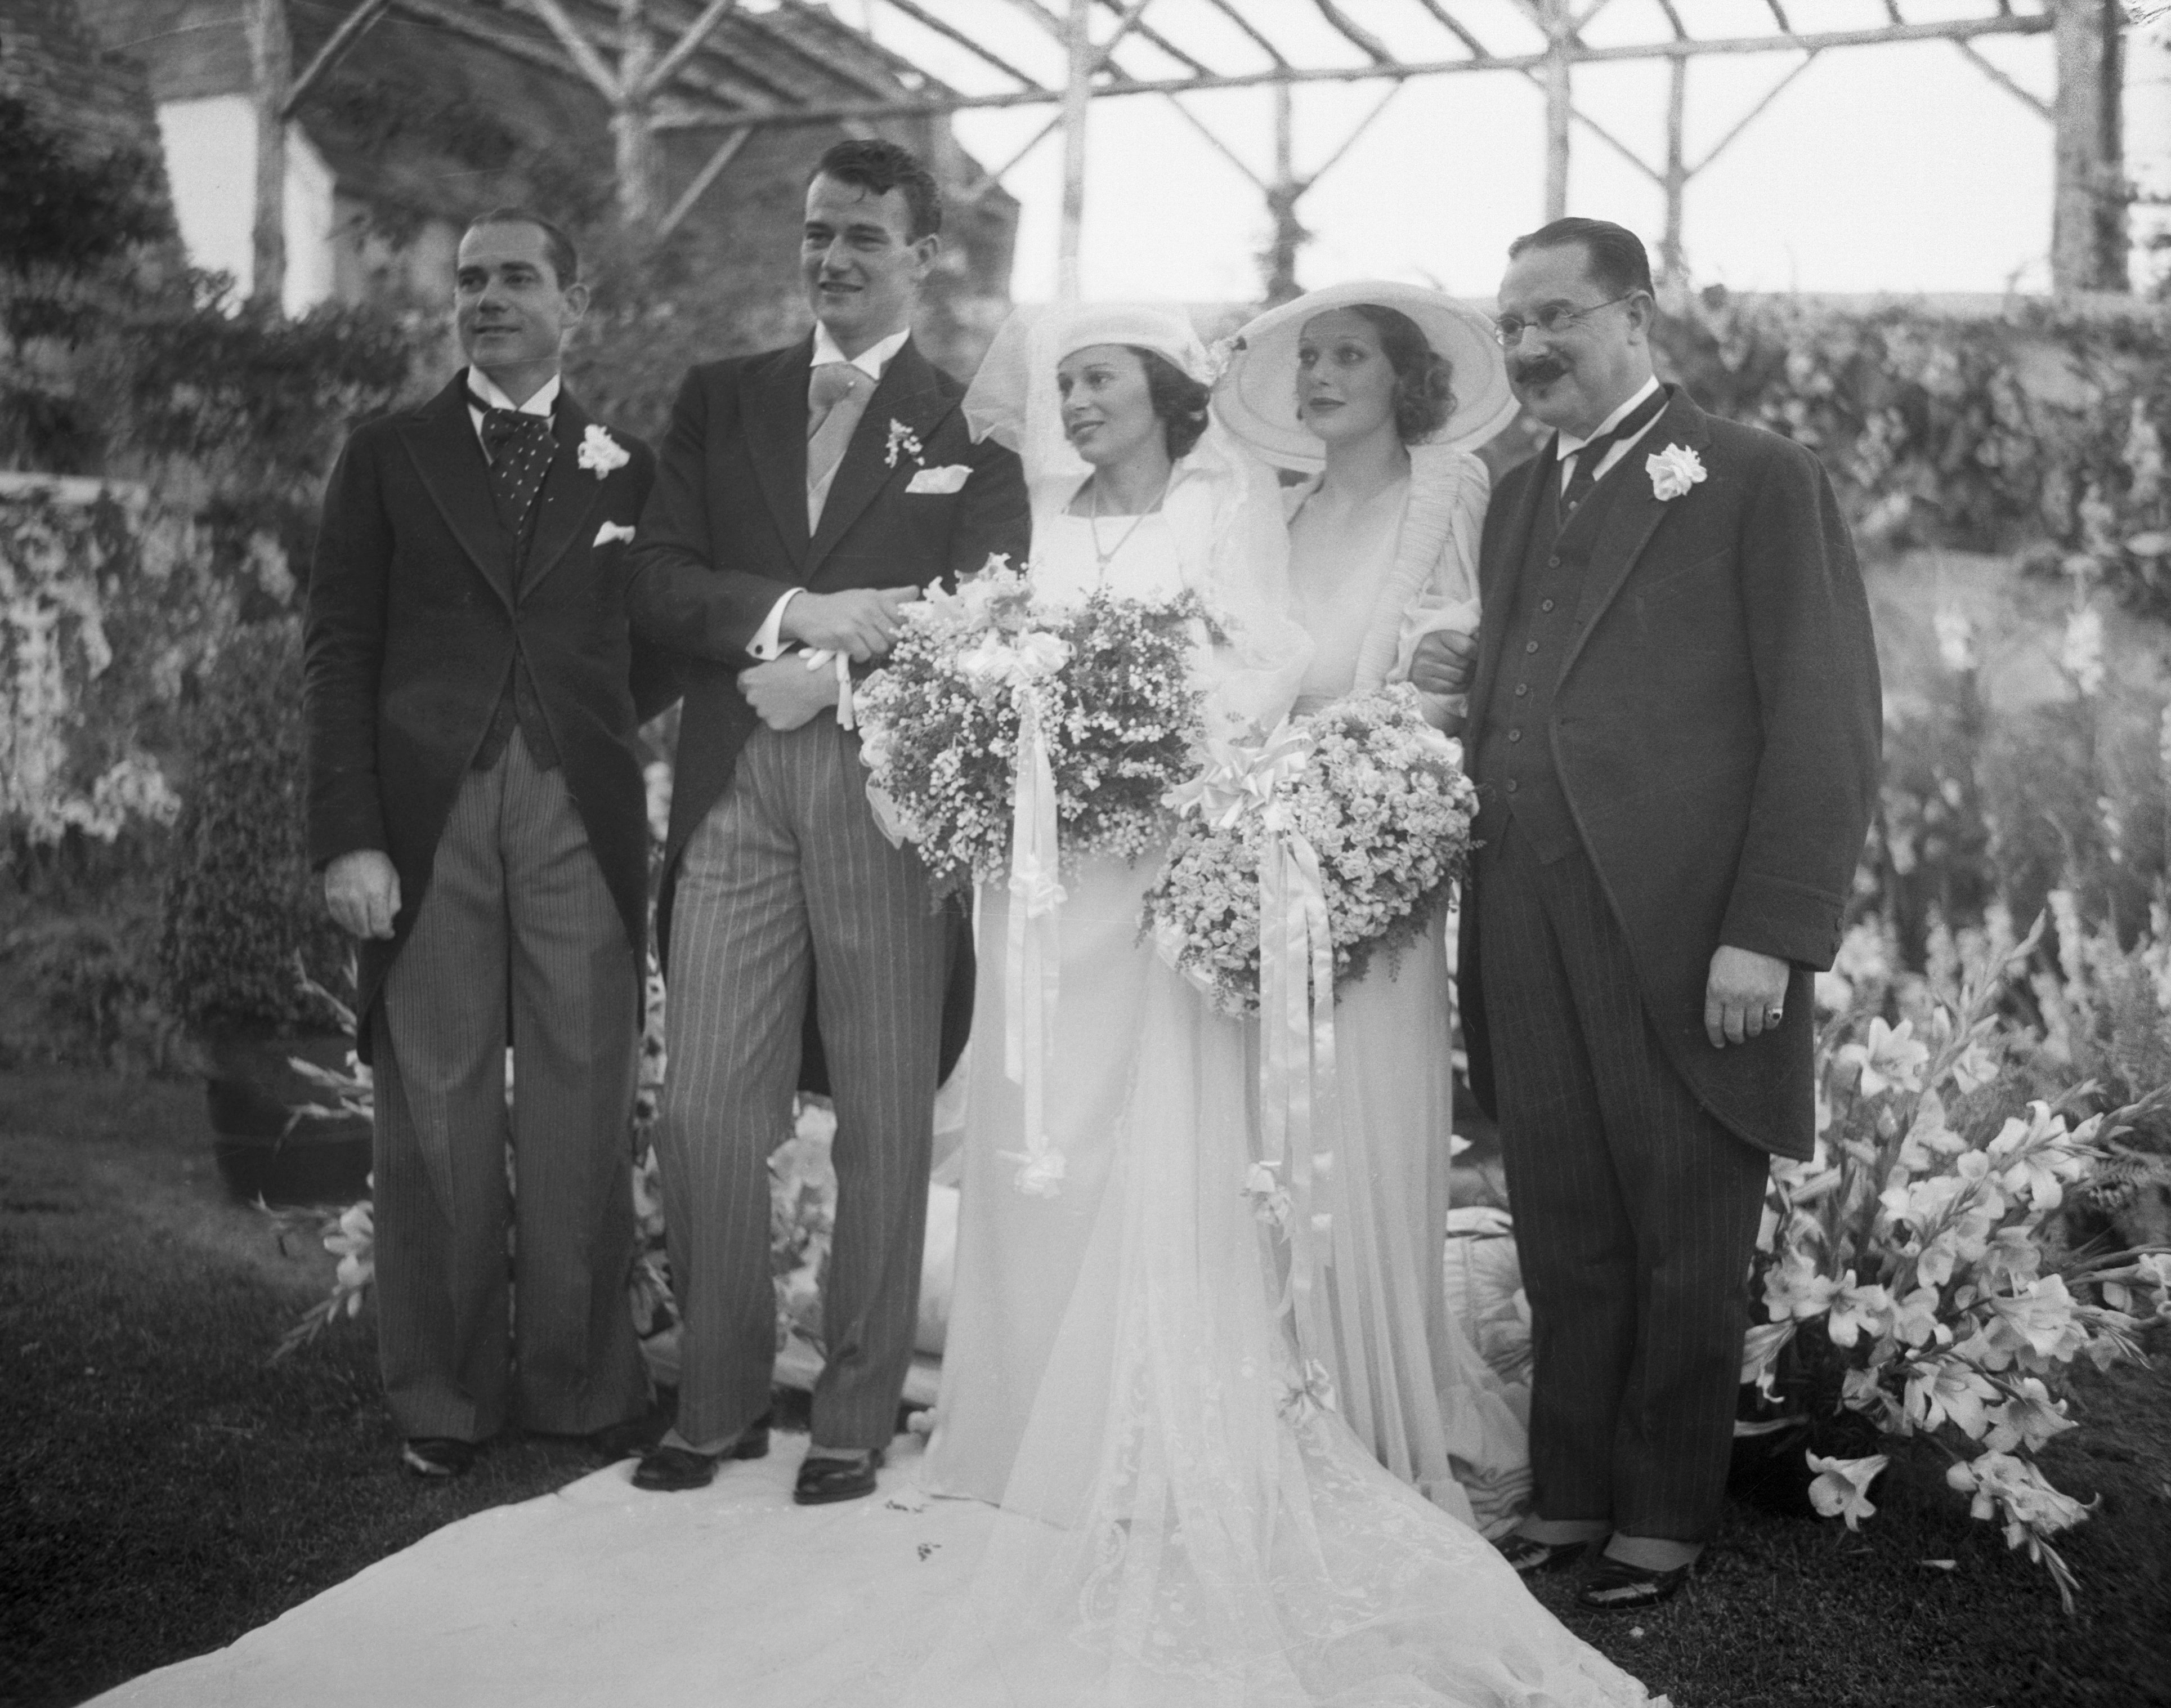  Screen actor Weds Daughter Of Latin American Consul. John Wayne, motion picture actor, and his bride, the former Miss Josephine Saenz, Panamanian Consul in Los Angeles, shown after their marriage at the Los Angeles home of Loretta Young,| Source: Getty Images